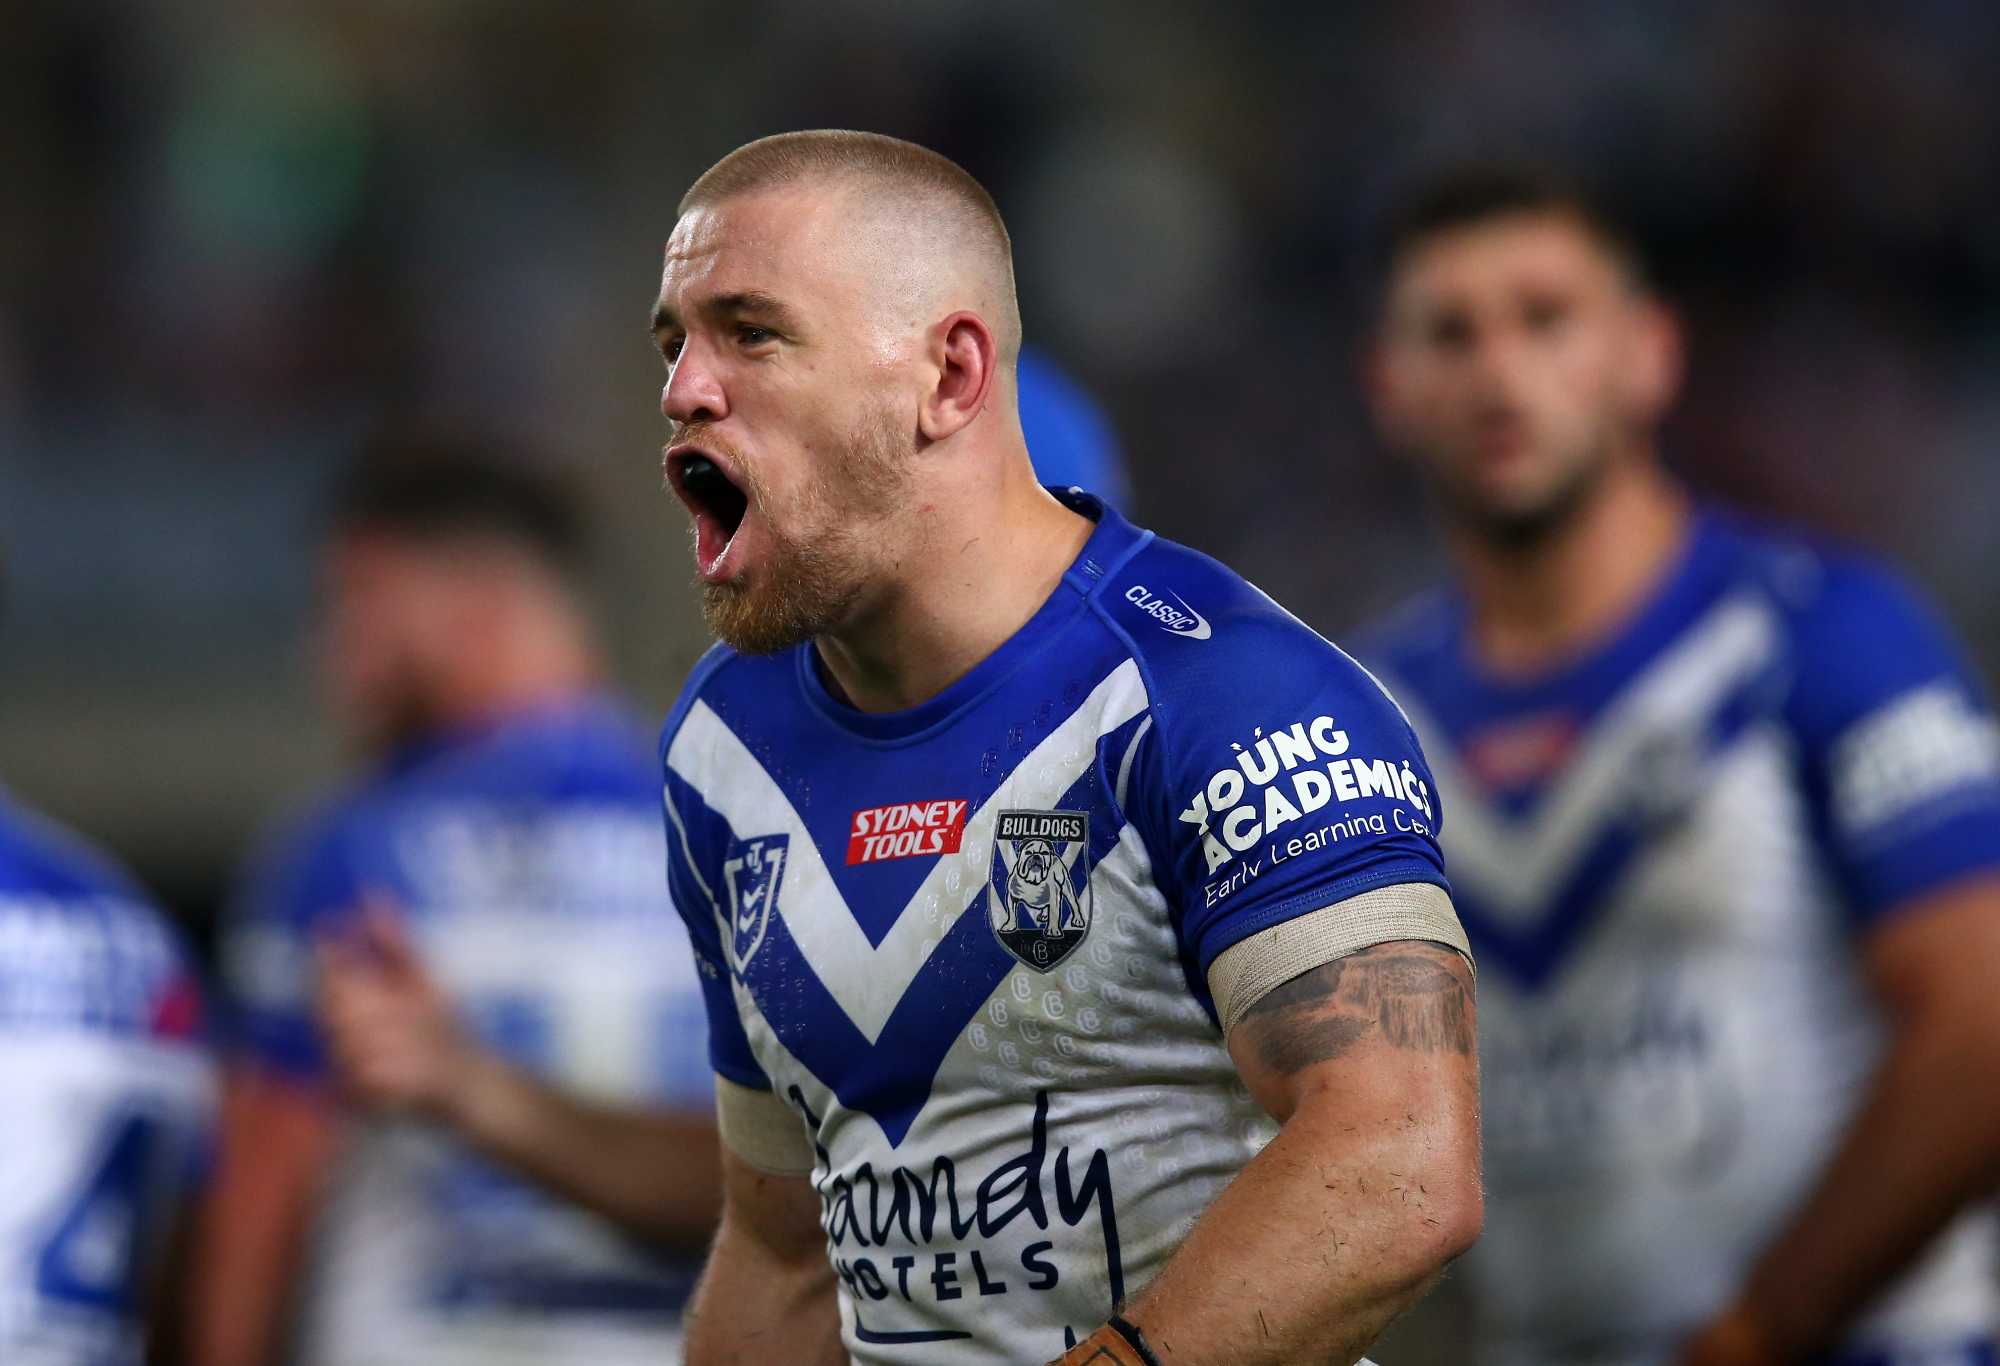 Matt Dufty of the Bulldogs during the round eight NRL match between the Canterbury Bulldogs and the Sydney Roosters at Stadium Australia on April 30, 2022 in Sydney, Australia. (Photo by Jason McCawley/Getty Images)